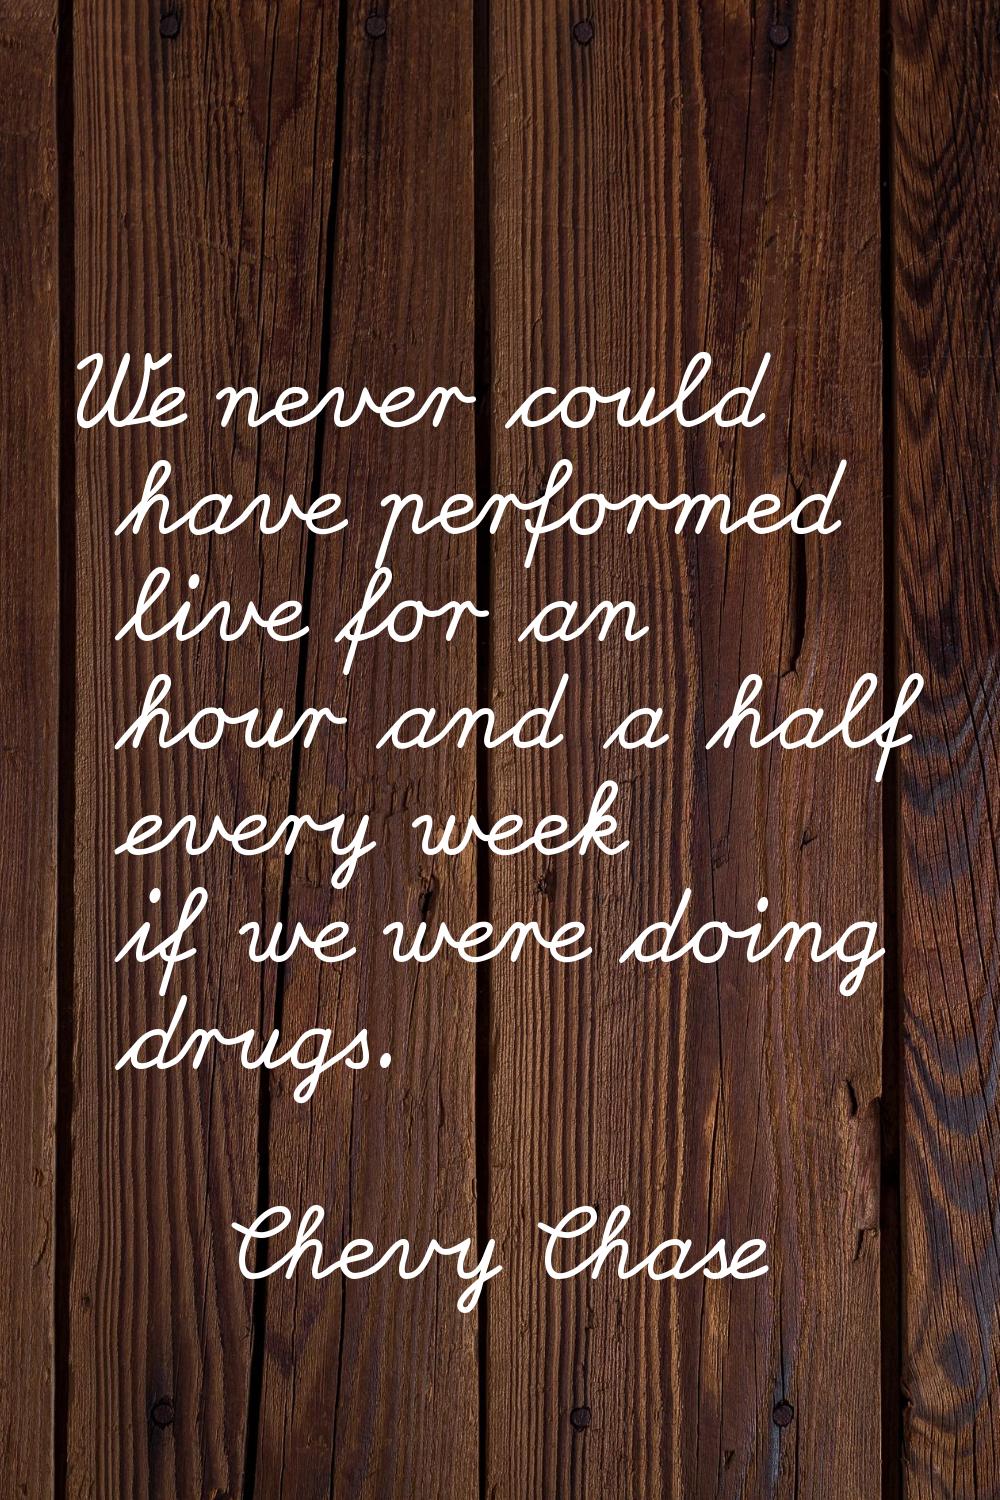 We never could have performed live for an hour and a half every week if we were doing drugs.